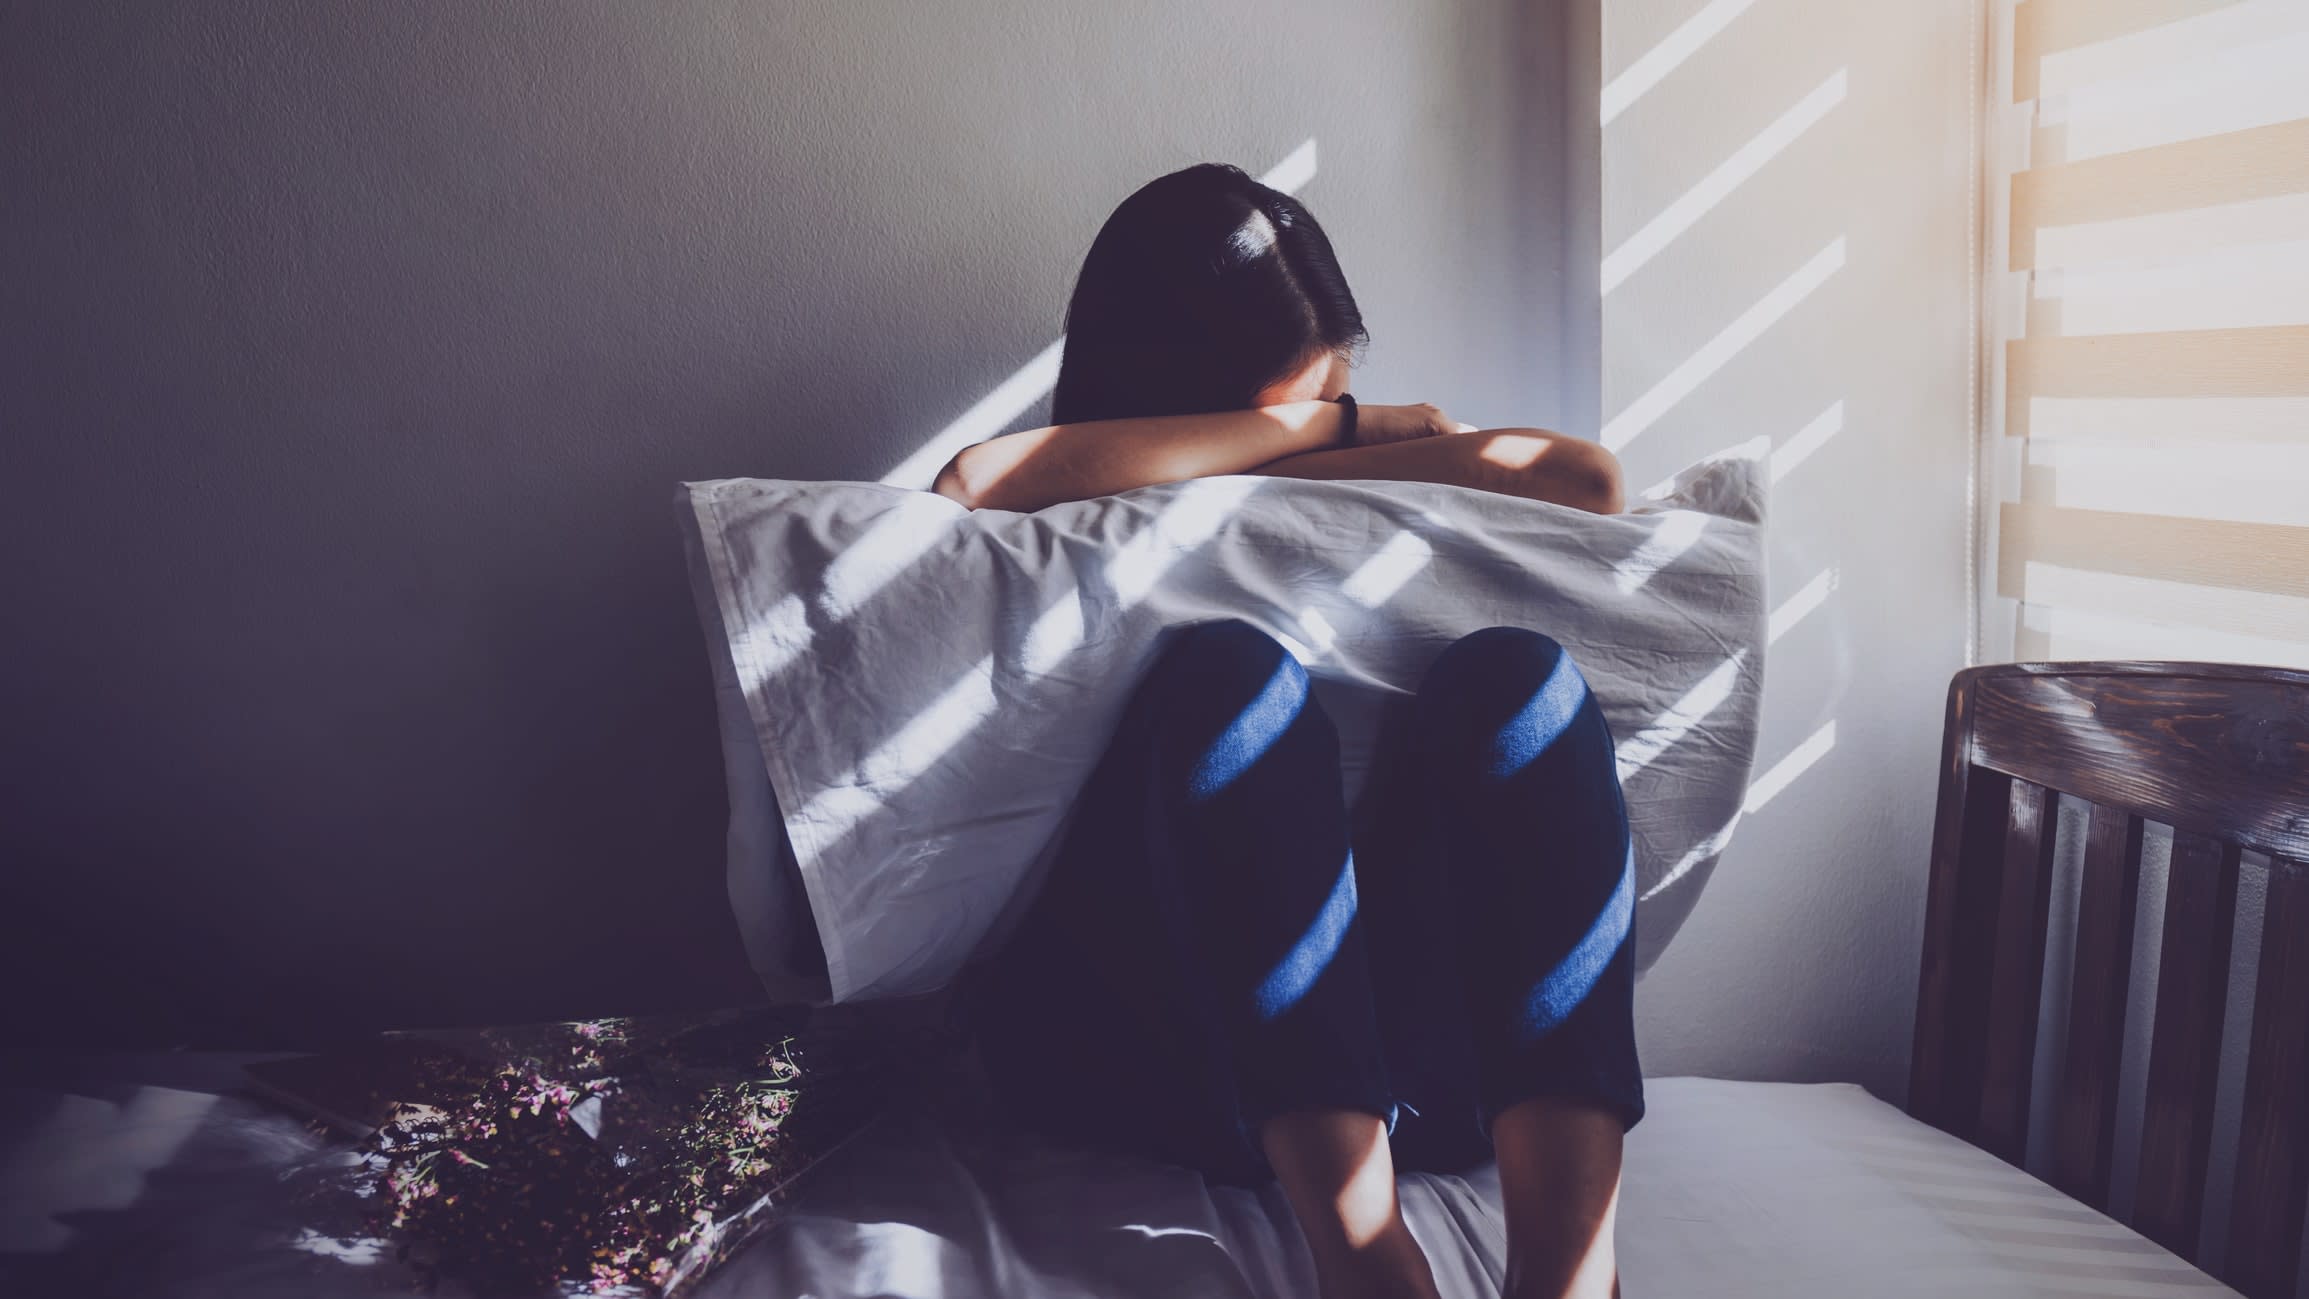 Women hugging a pillow and her knees on a bed in a dimly-lit bedroom, looking sad as sun shines in the window